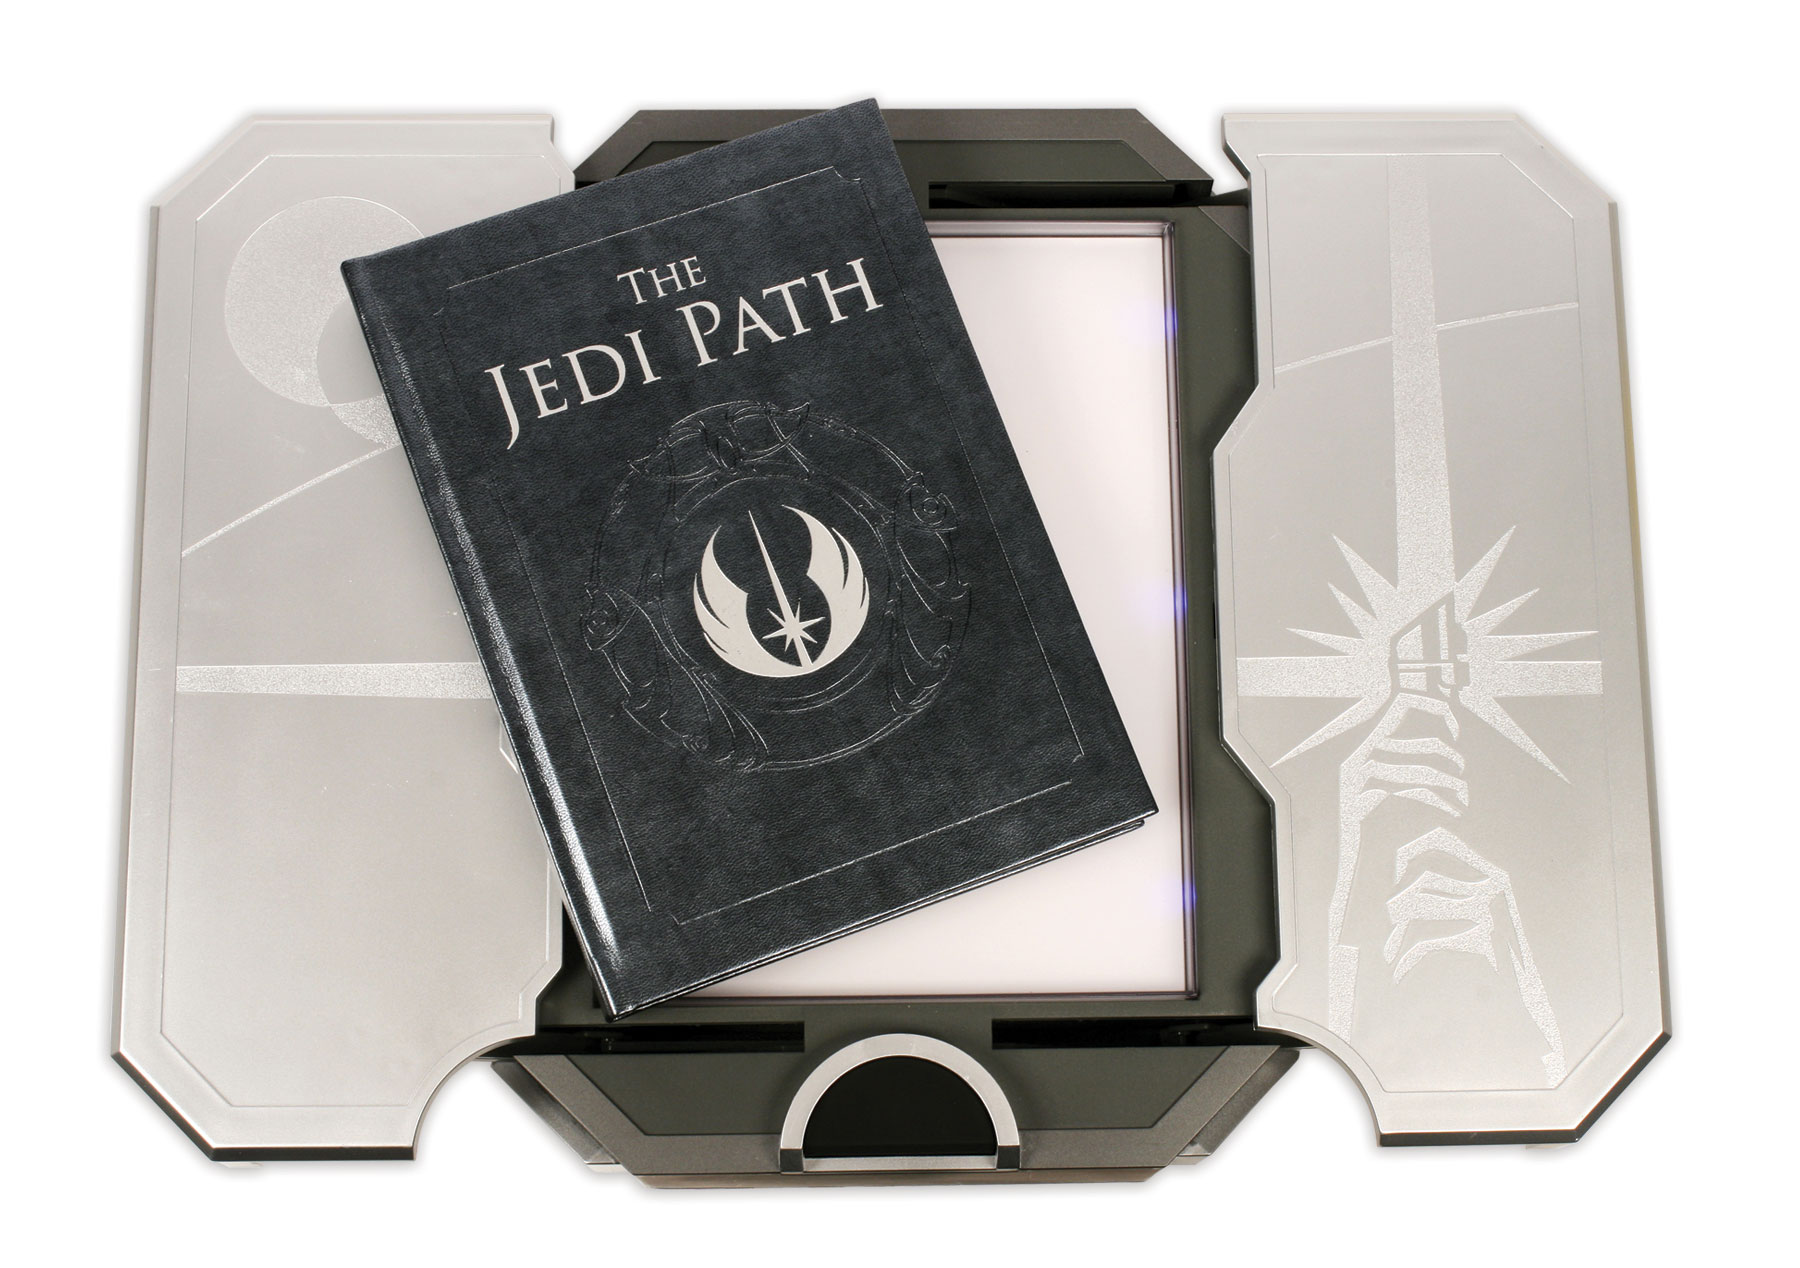 The Jedi Path: A Manual for Students of the Force (Deluxe Edition)